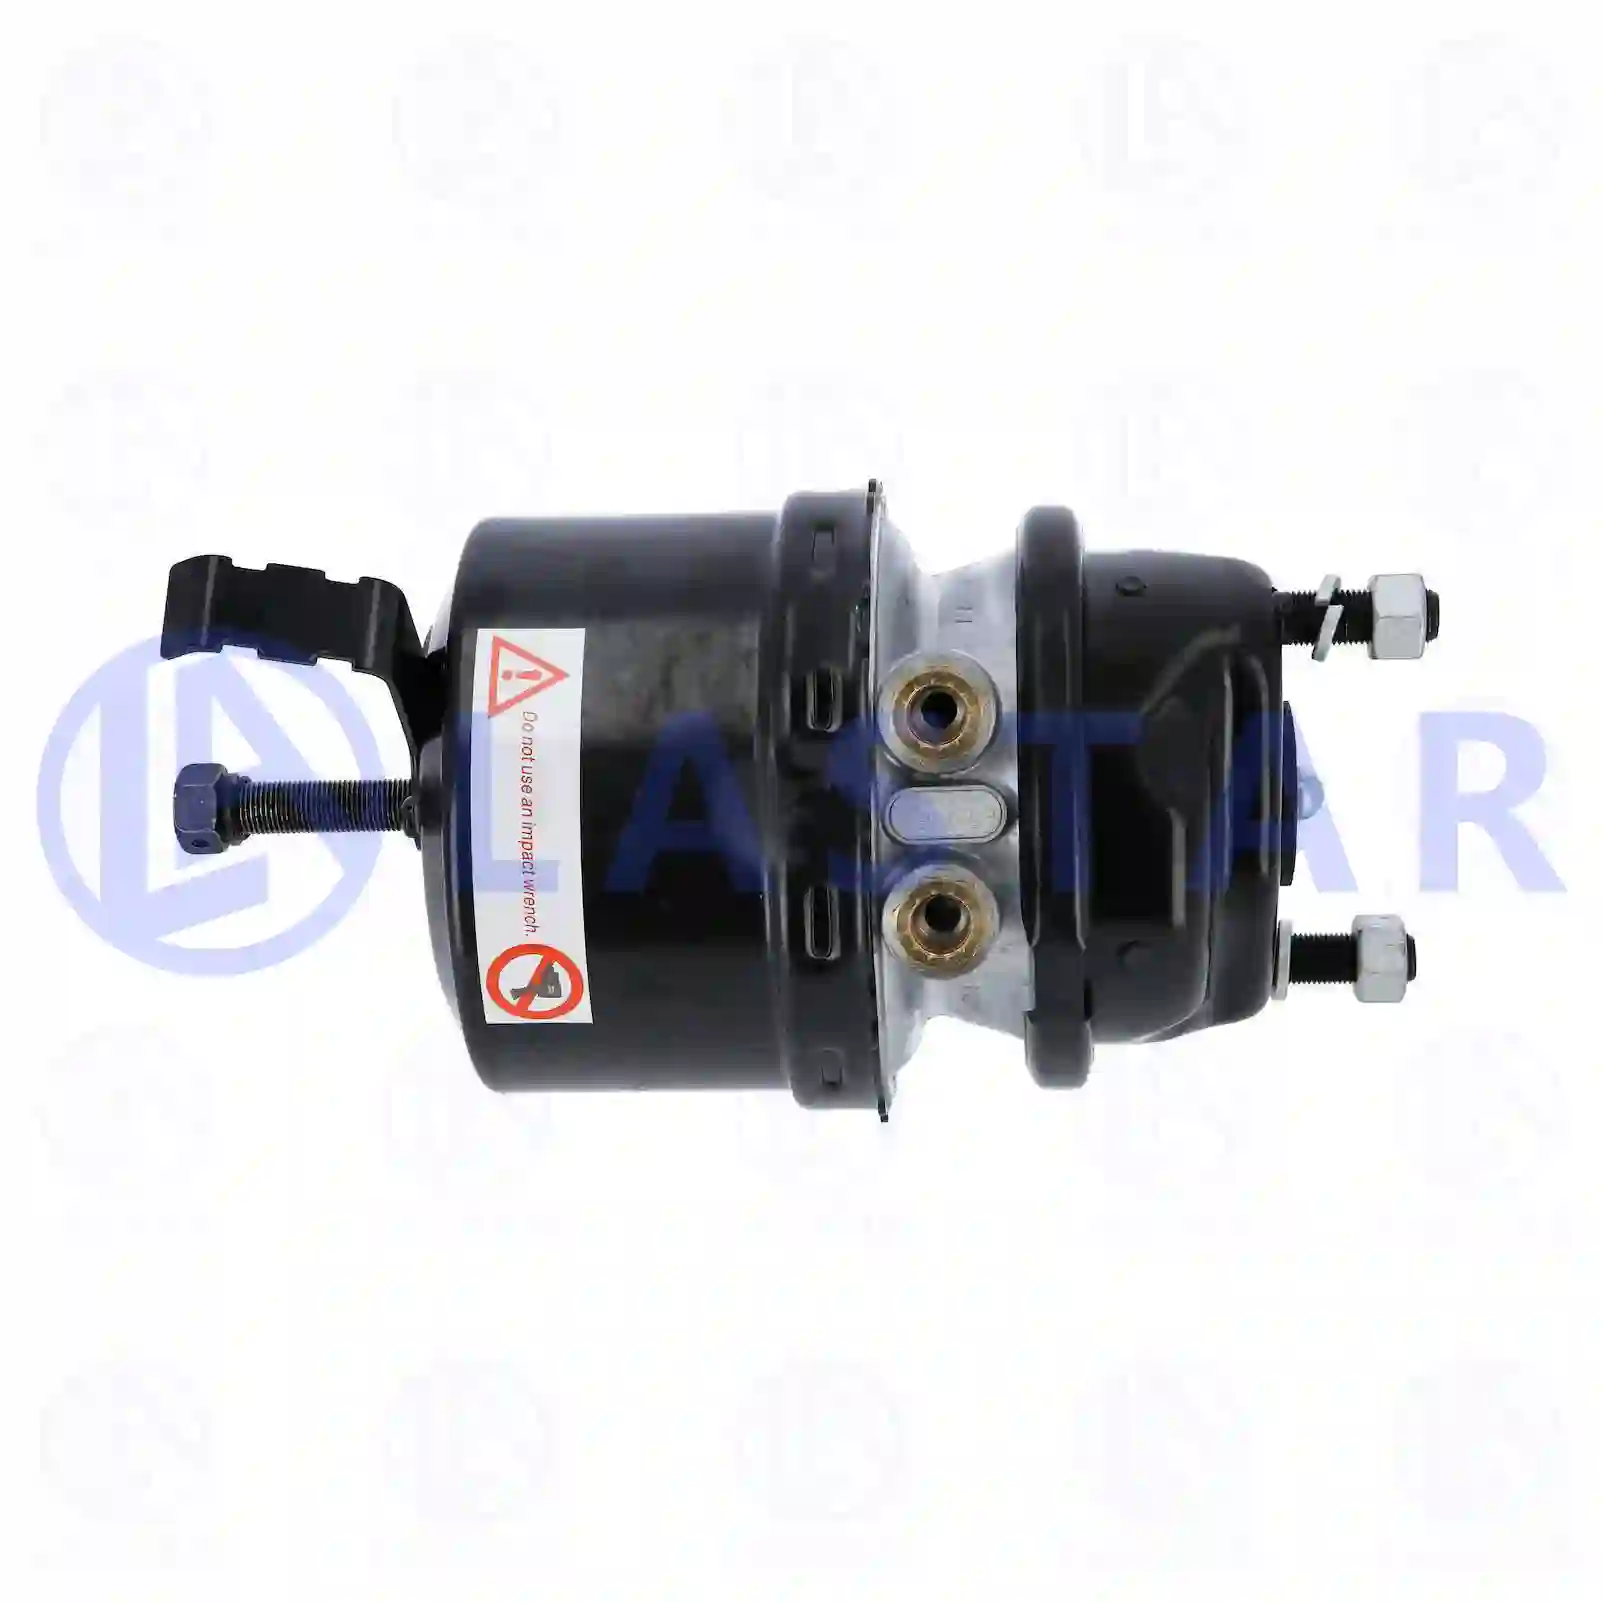 Spring brake cylinder, right, 77715397, 1505449, 0154205518, 0204203118, , ||  77715397 Lastar Spare Part | Truck Spare Parts, Auotomotive Spare Parts Spring brake cylinder, right, 77715397, 1505449, 0154205518, 0204203118, , ||  77715397 Lastar Spare Part | Truck Spare Parts, Auotomotive Spare Parts